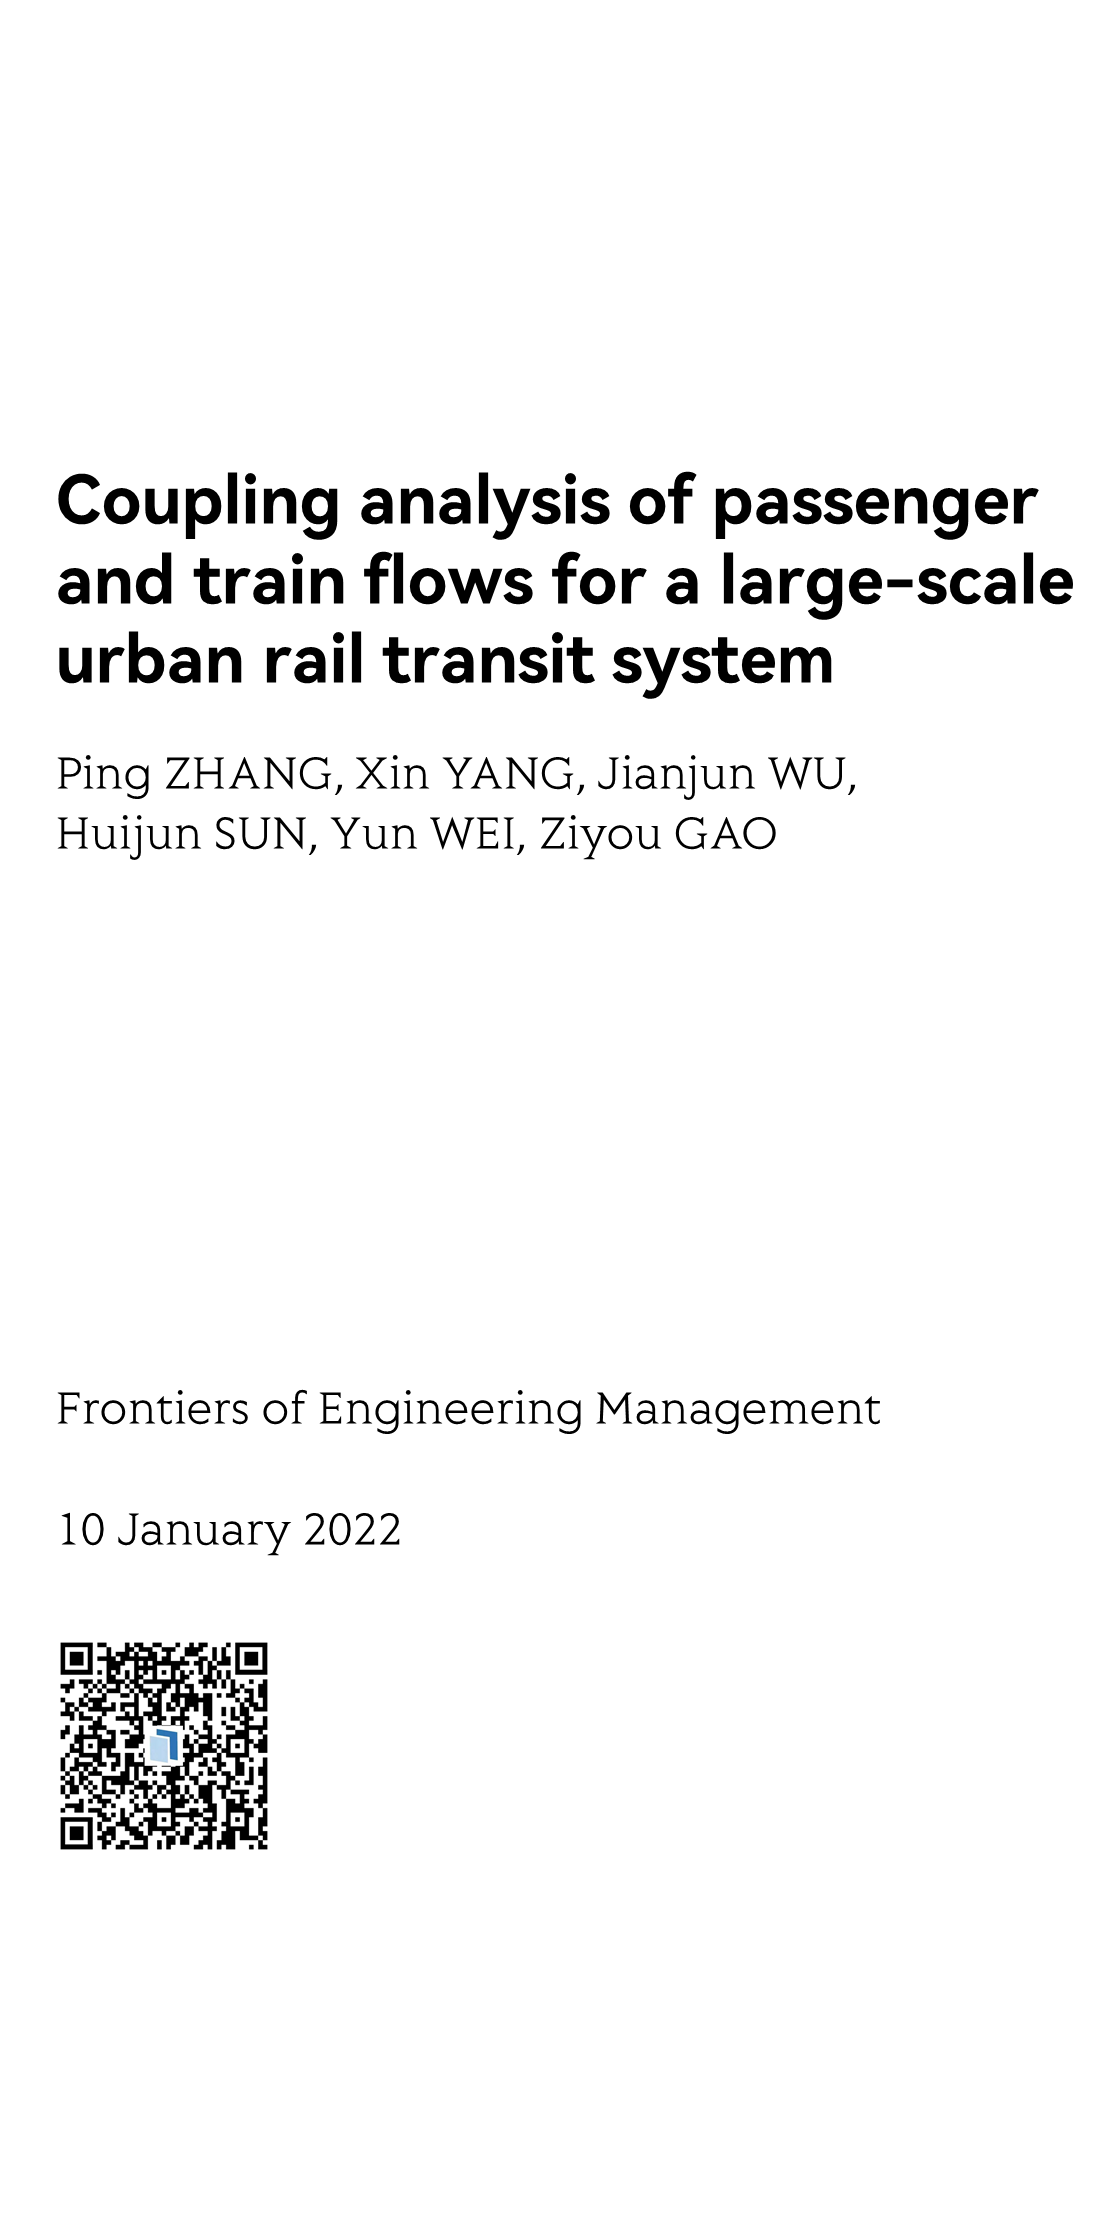 Coupling analysis of passenger and train flows for a large-scale urban rail transit system_1